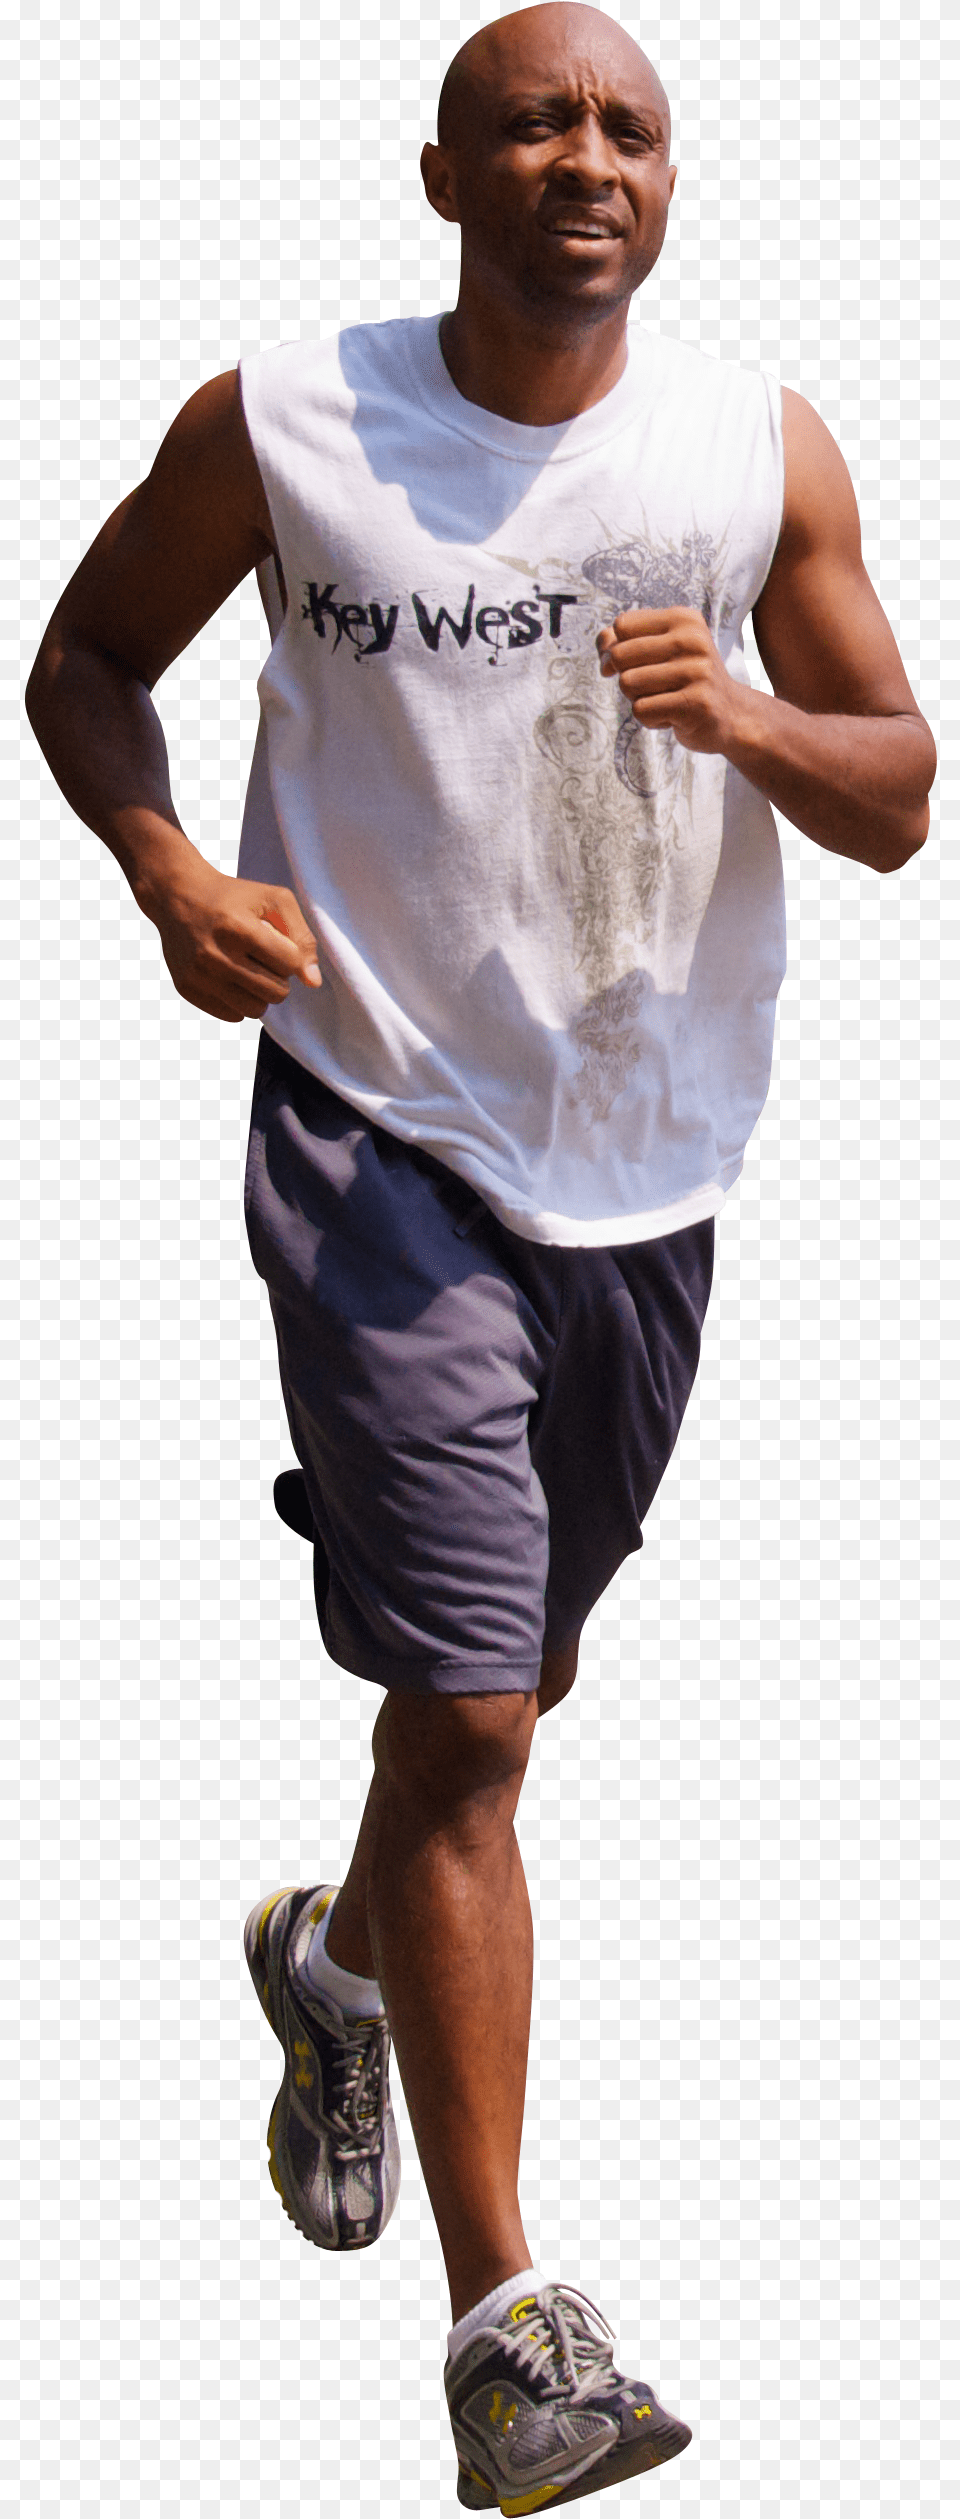 Jogging Transparent Images All People Jogging, T-shirt, Sneaker, Clothing, Shorts Png